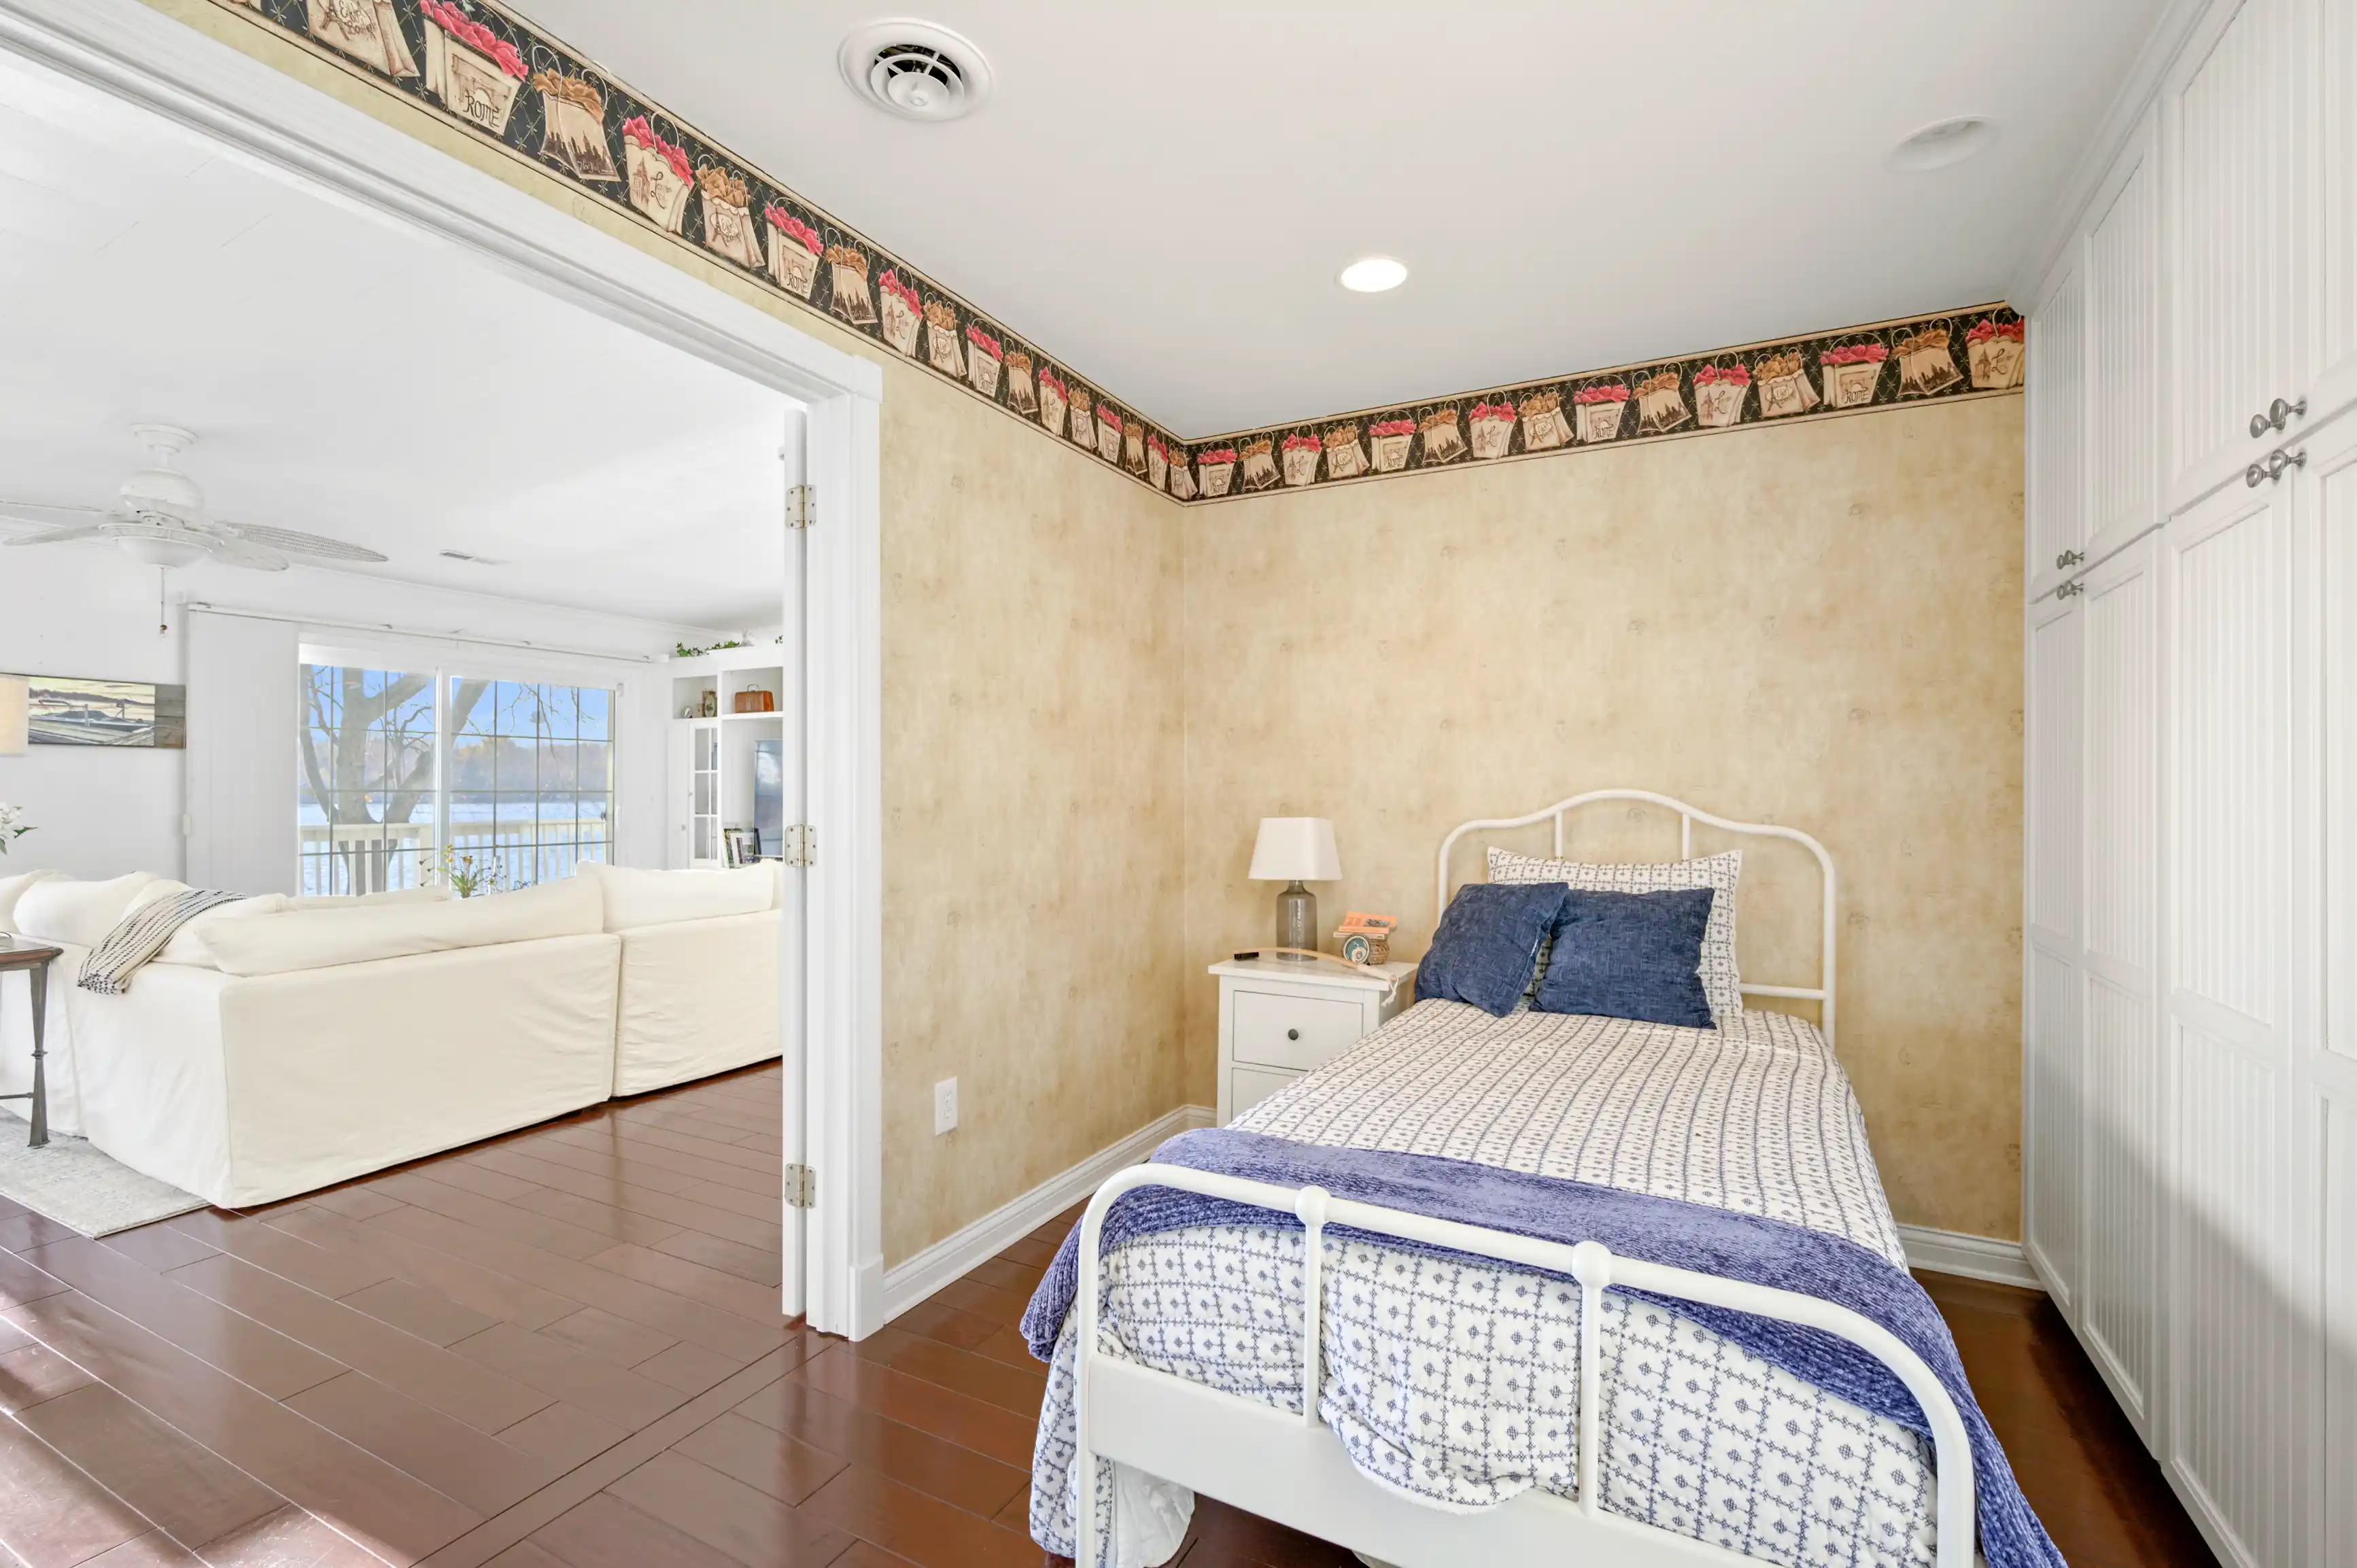 Bright and welcoming bedroom interior with a blue and white bedspread, beige walls, and tiled flooring, leading into an adjoining living room area with white sofa and a view of a waterfront through large windows.